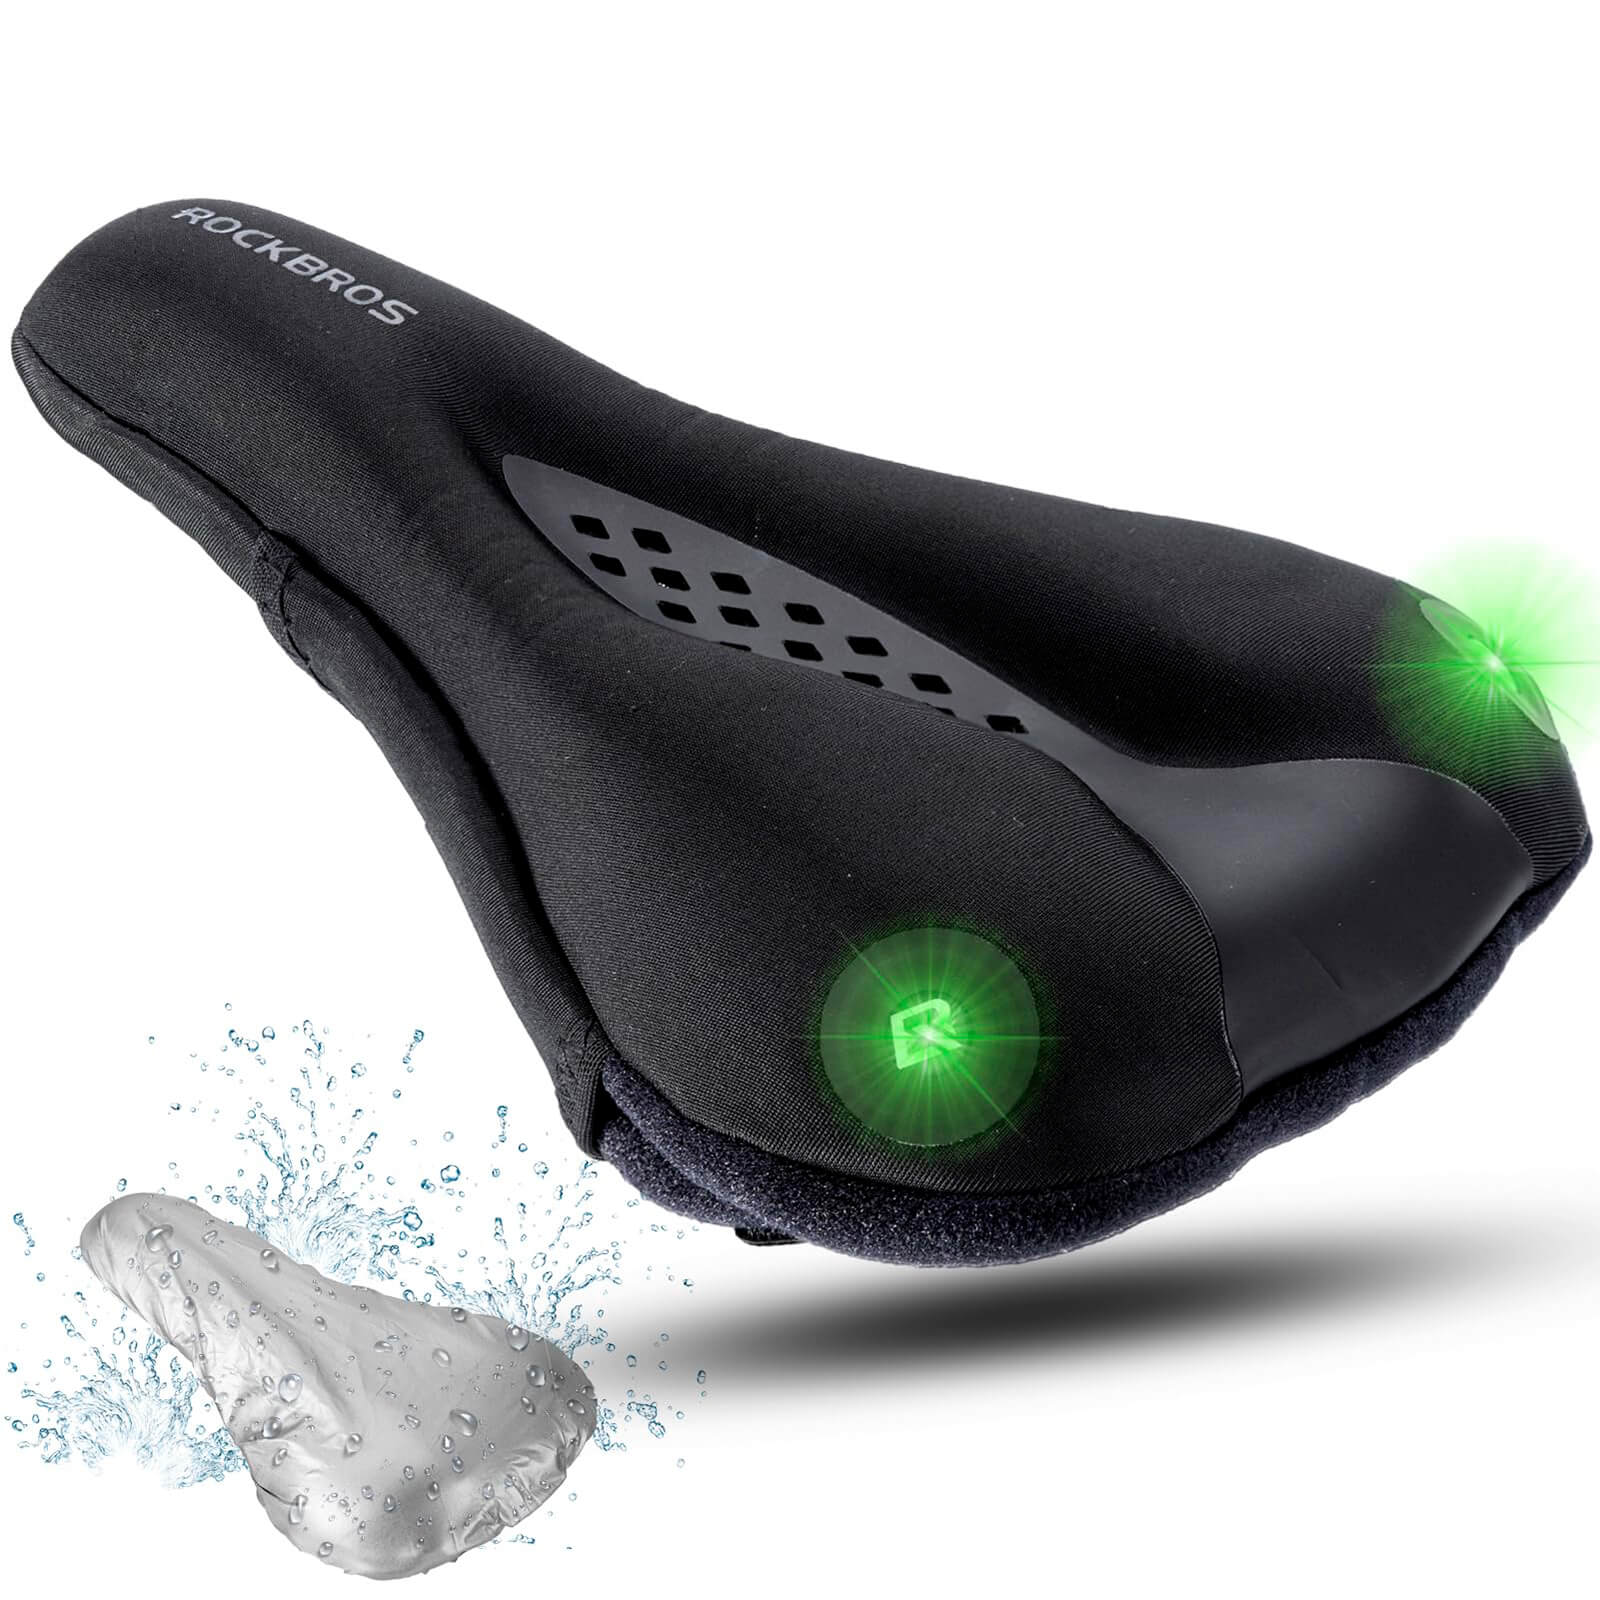 ROCKBROS Rechargeable Gel Bike Seat Cover with Rear Lights